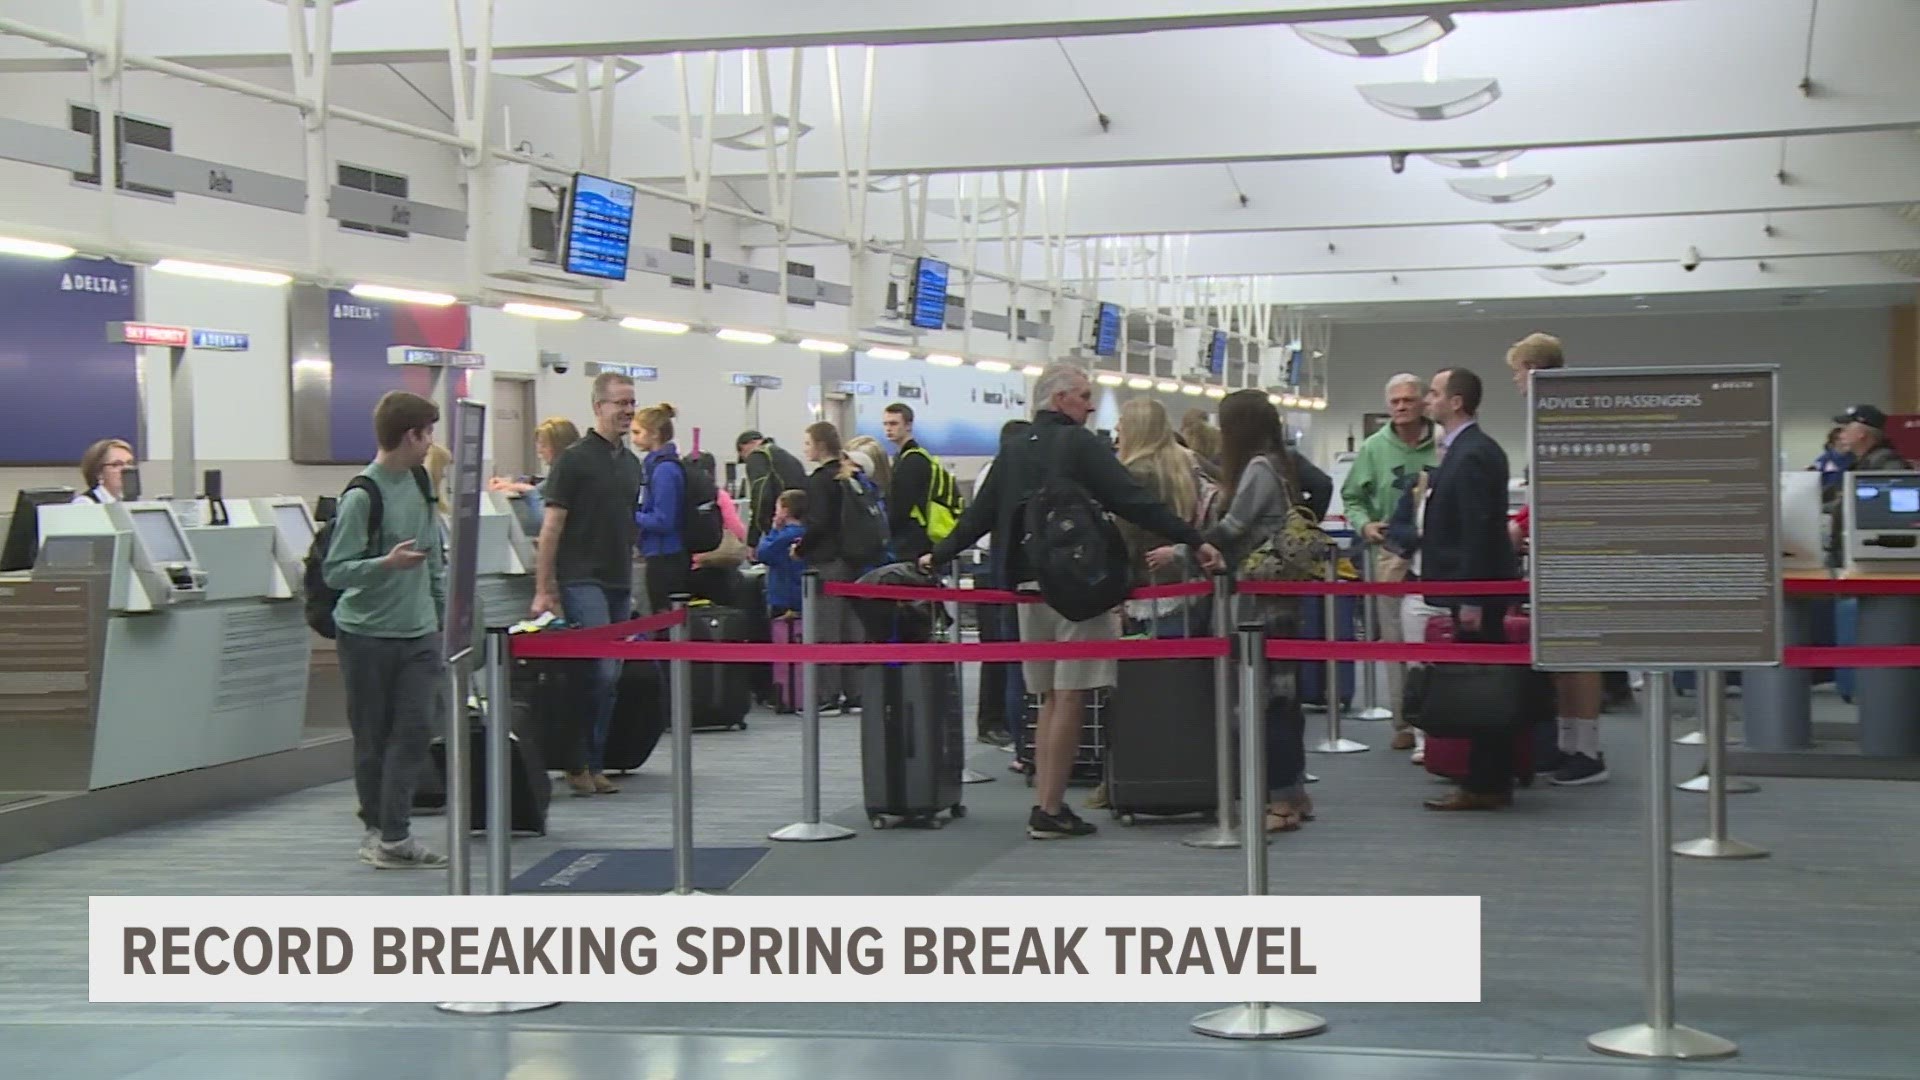 Officials say anywhere from 95,000 to 100,000 passengers will go through the airport between Thursday and Monday, April 8.